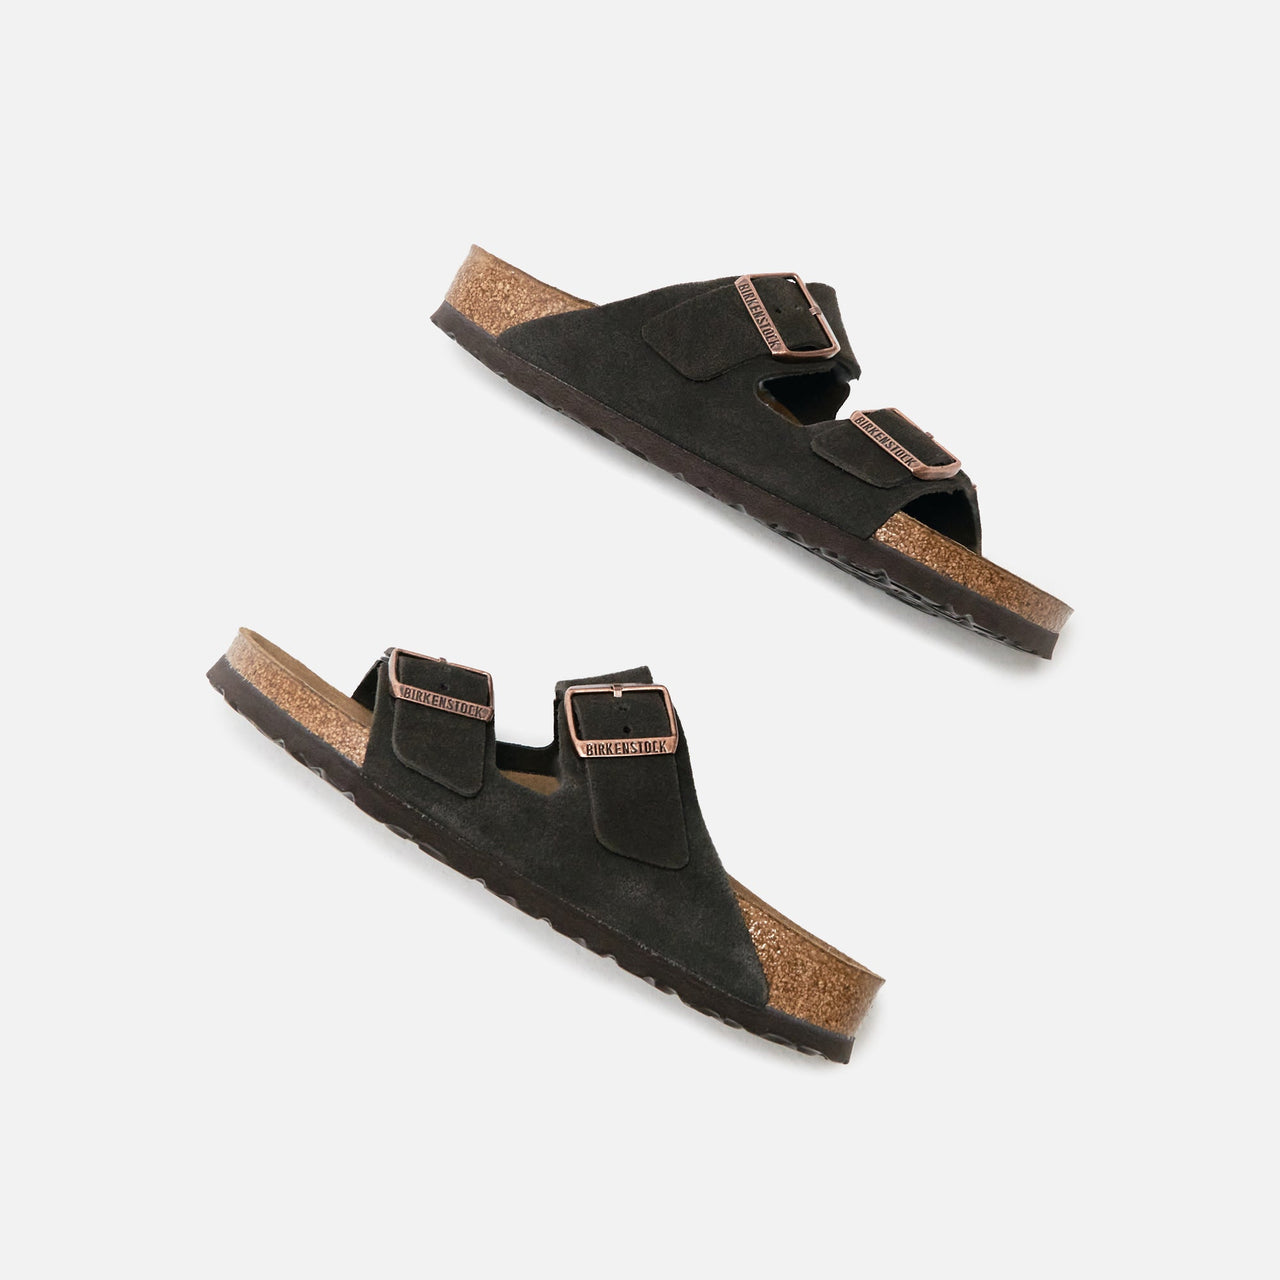 Pair of Mocha-colored Birkenstock Women's Suede Sandals featuring soft suede material, contoured footbed, and durable rubber sole